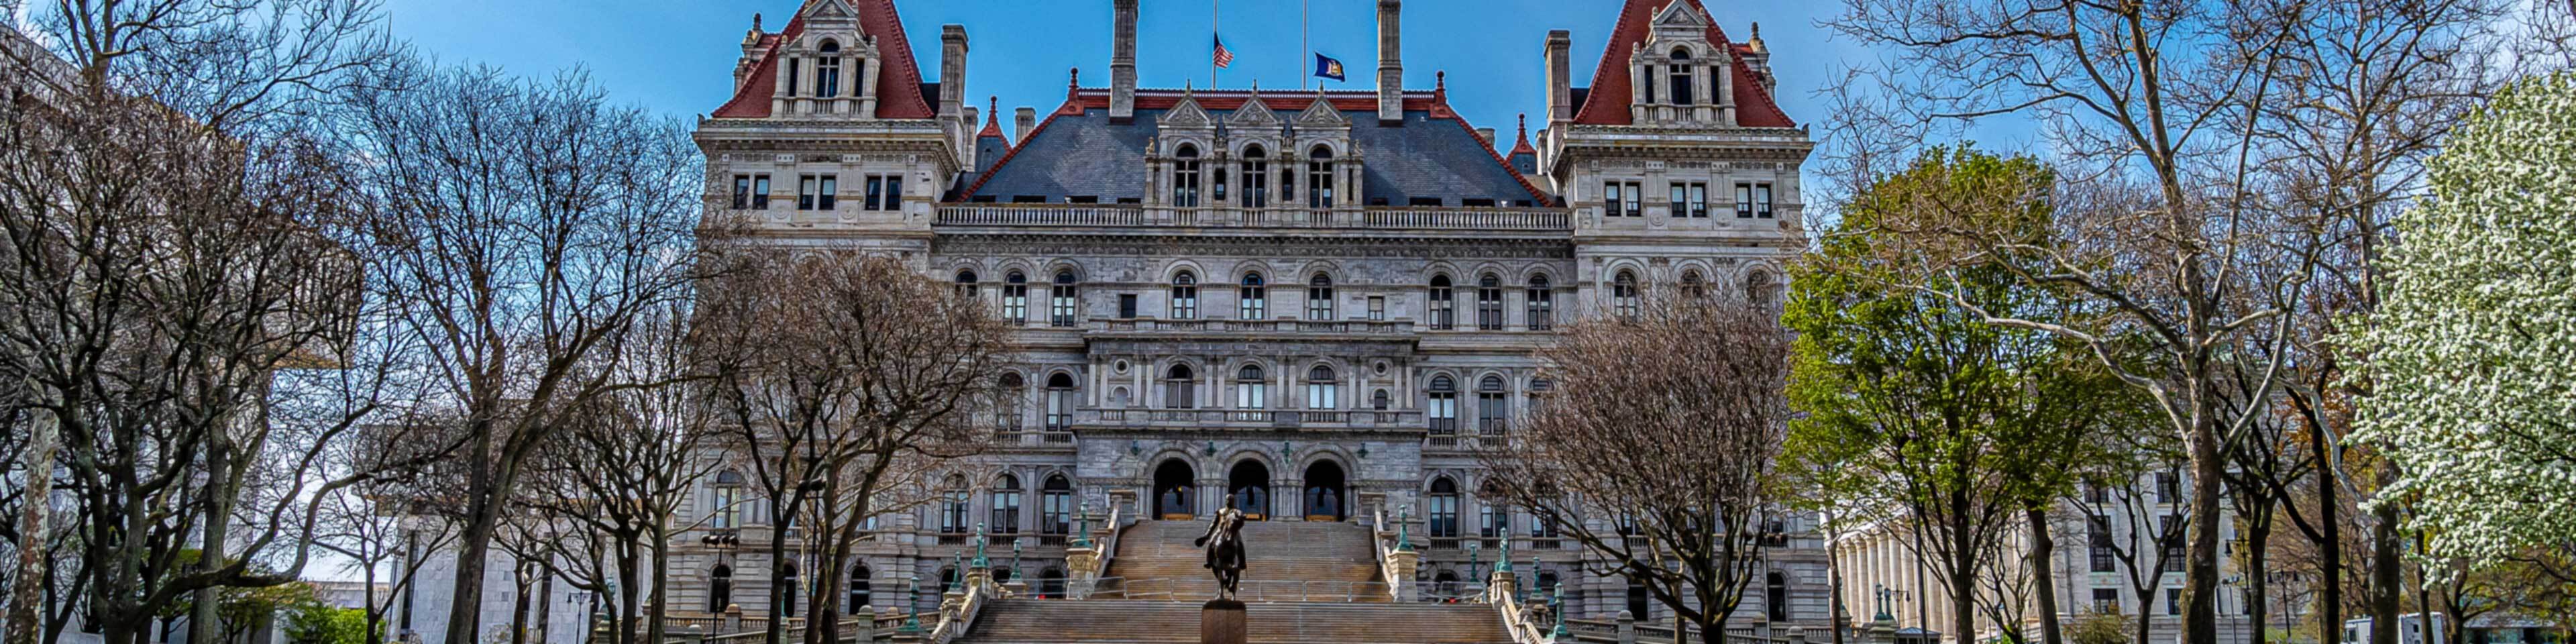 NY state capitol building requiring NYS vendor IDs